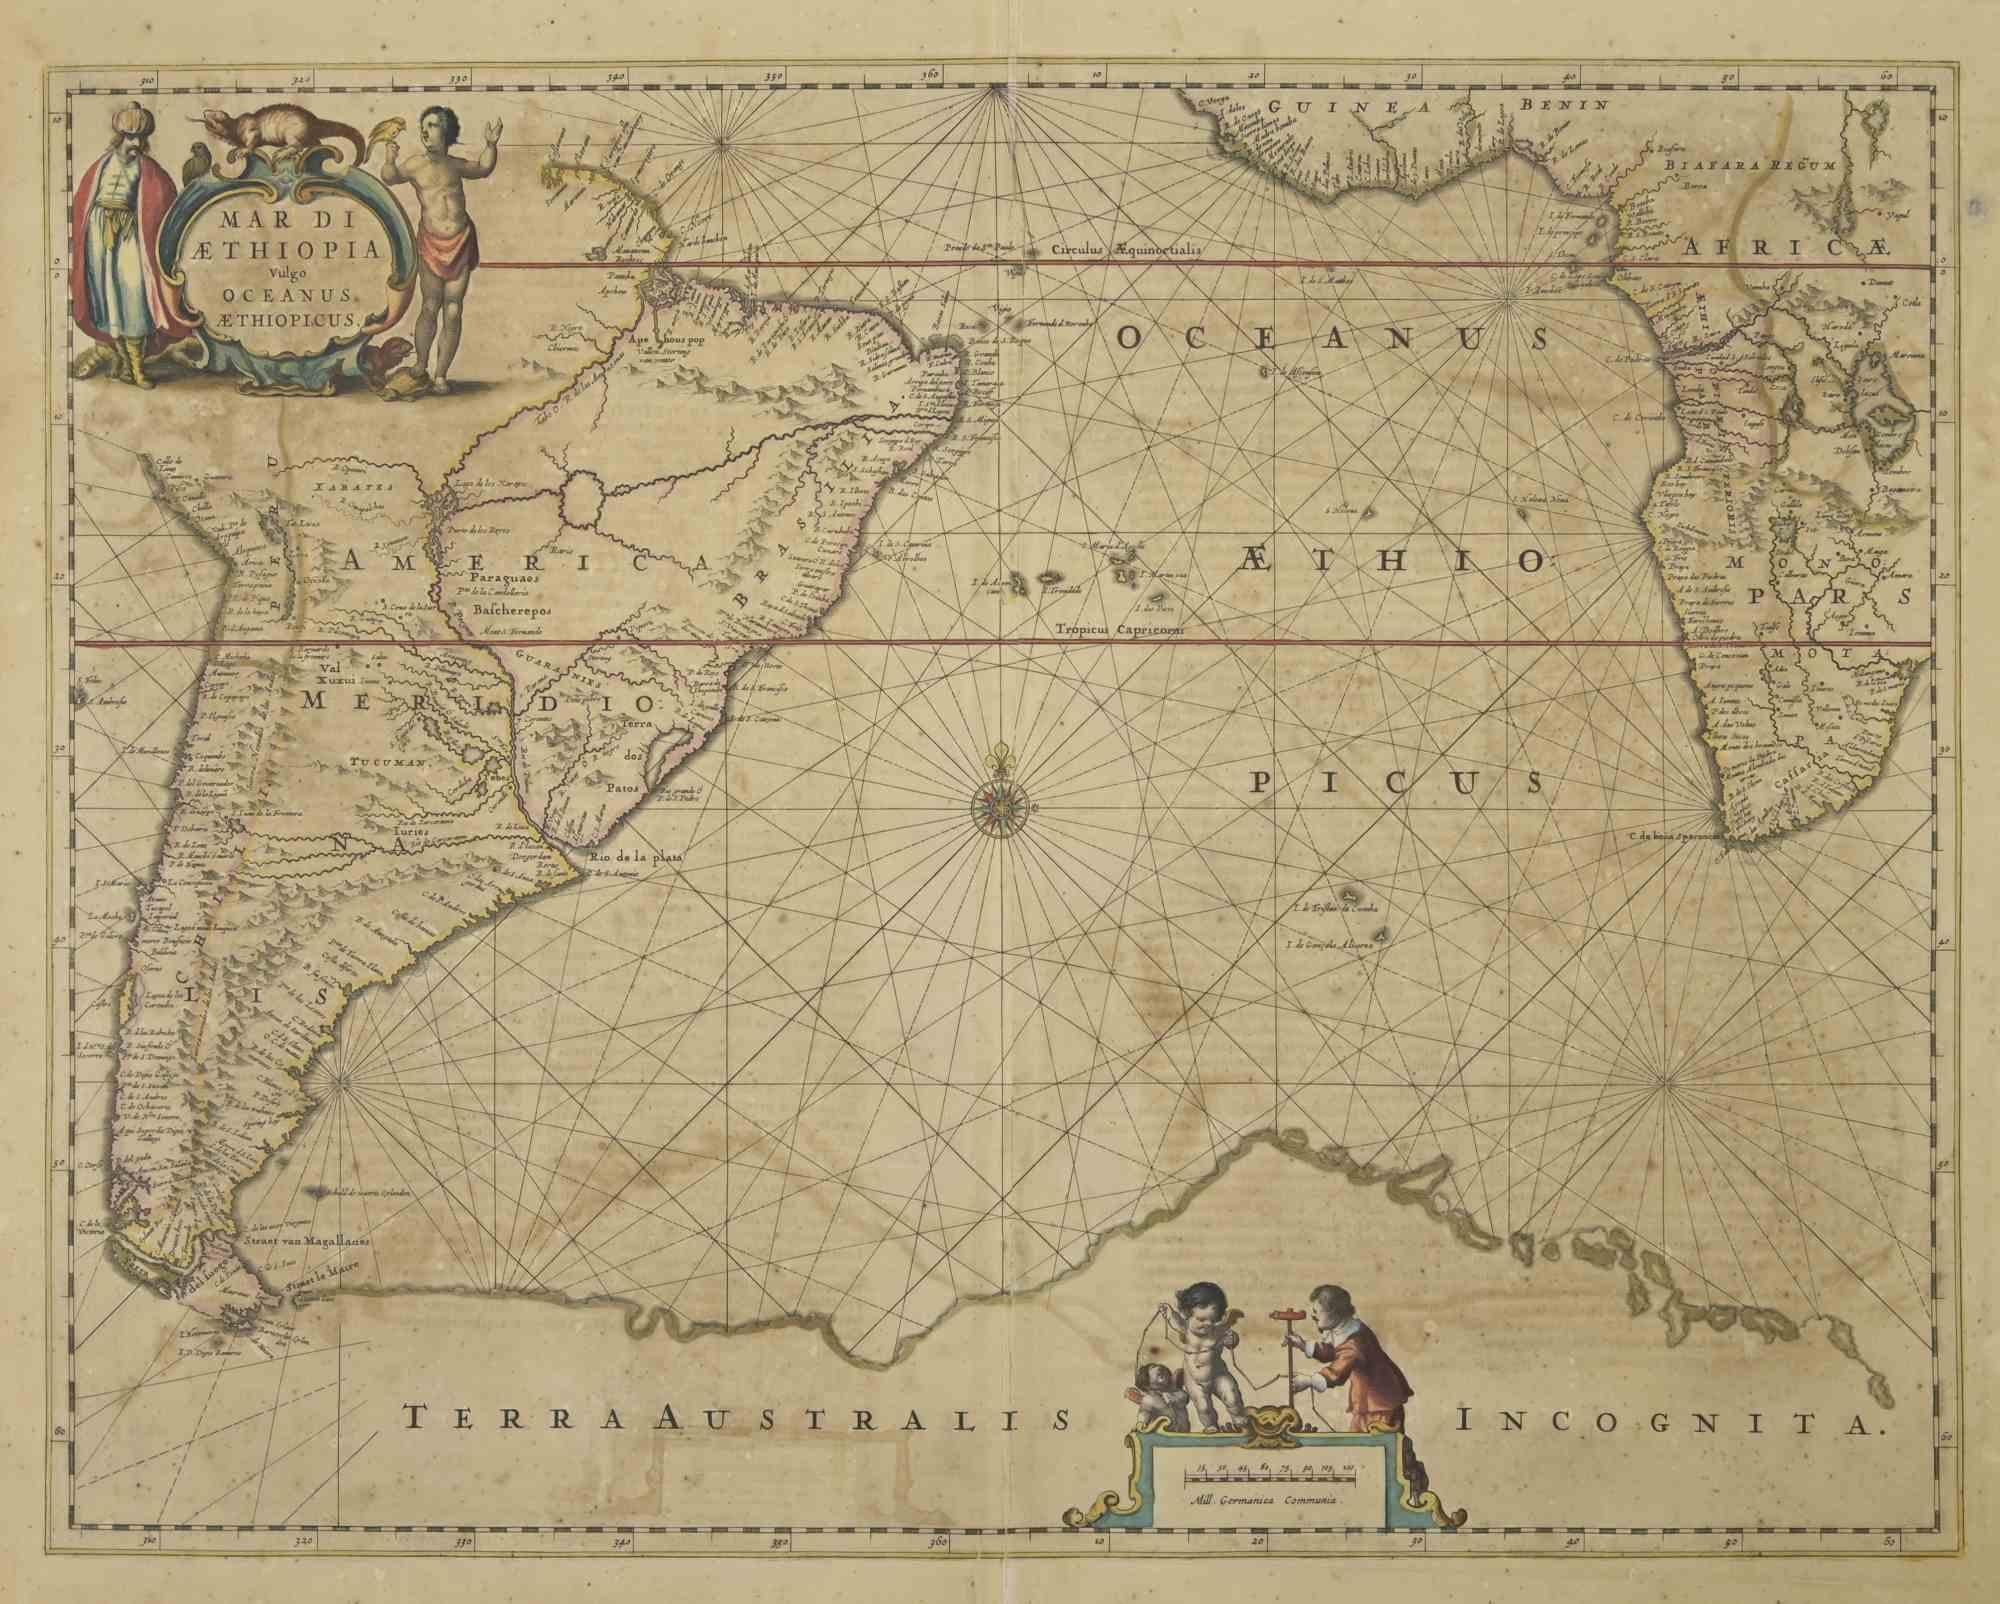 Antique Map - Mar Di Athiopia is an antique map realized in 1650 by Johannes Janssonius (1588-1664).

The Map is Hand-colored etching, with coeval watercolorang.

Good conditions with slight foxing.

From Atlantis majoris quinta pars, Orbem